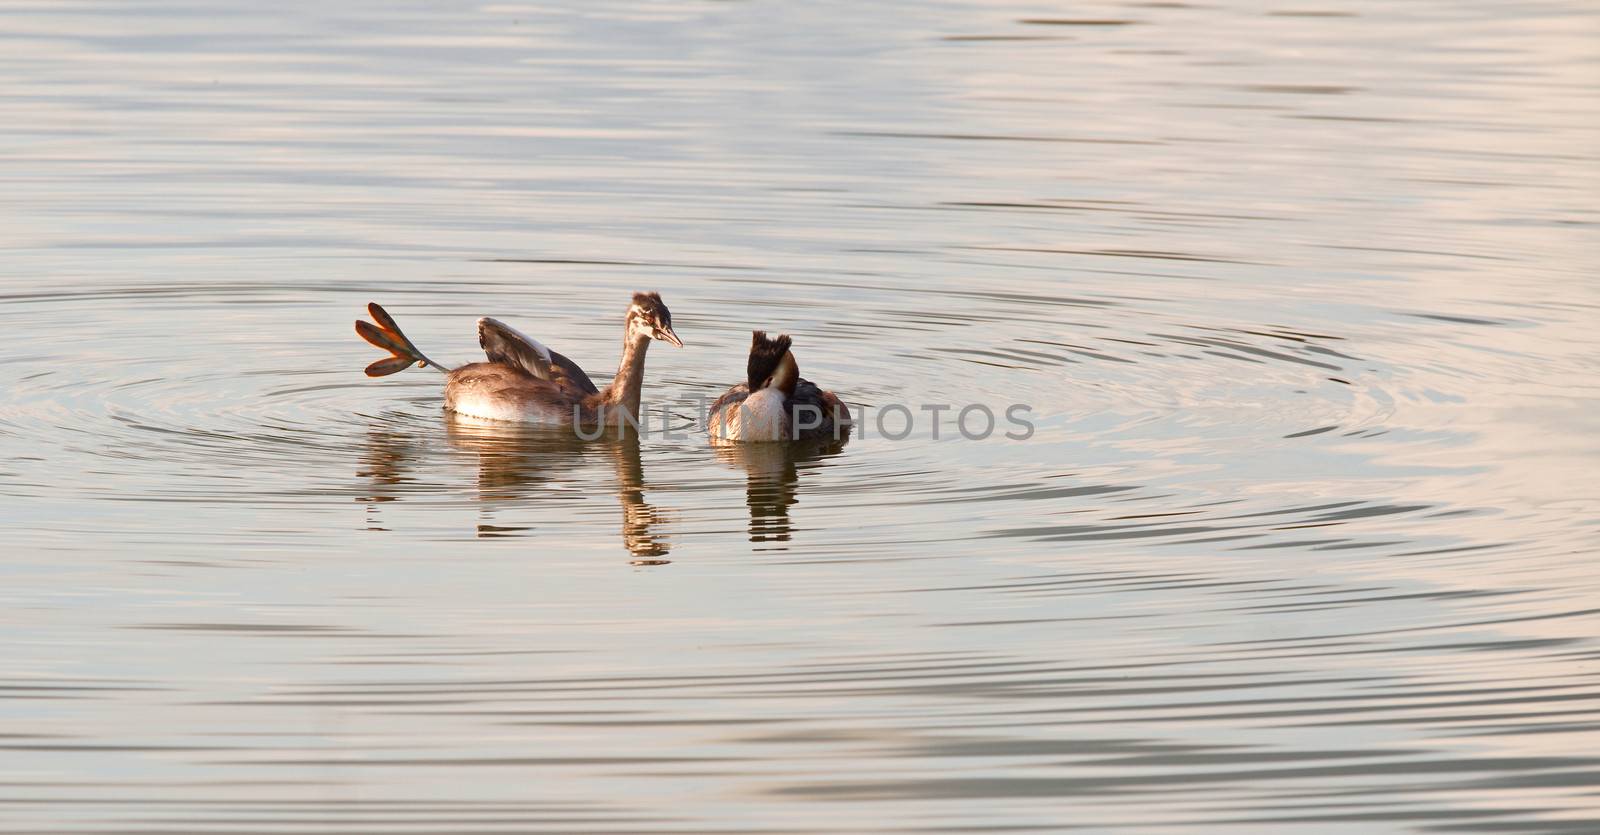 Female Great Crested Grebe ignoring young adult begging for food in evening light on the lake